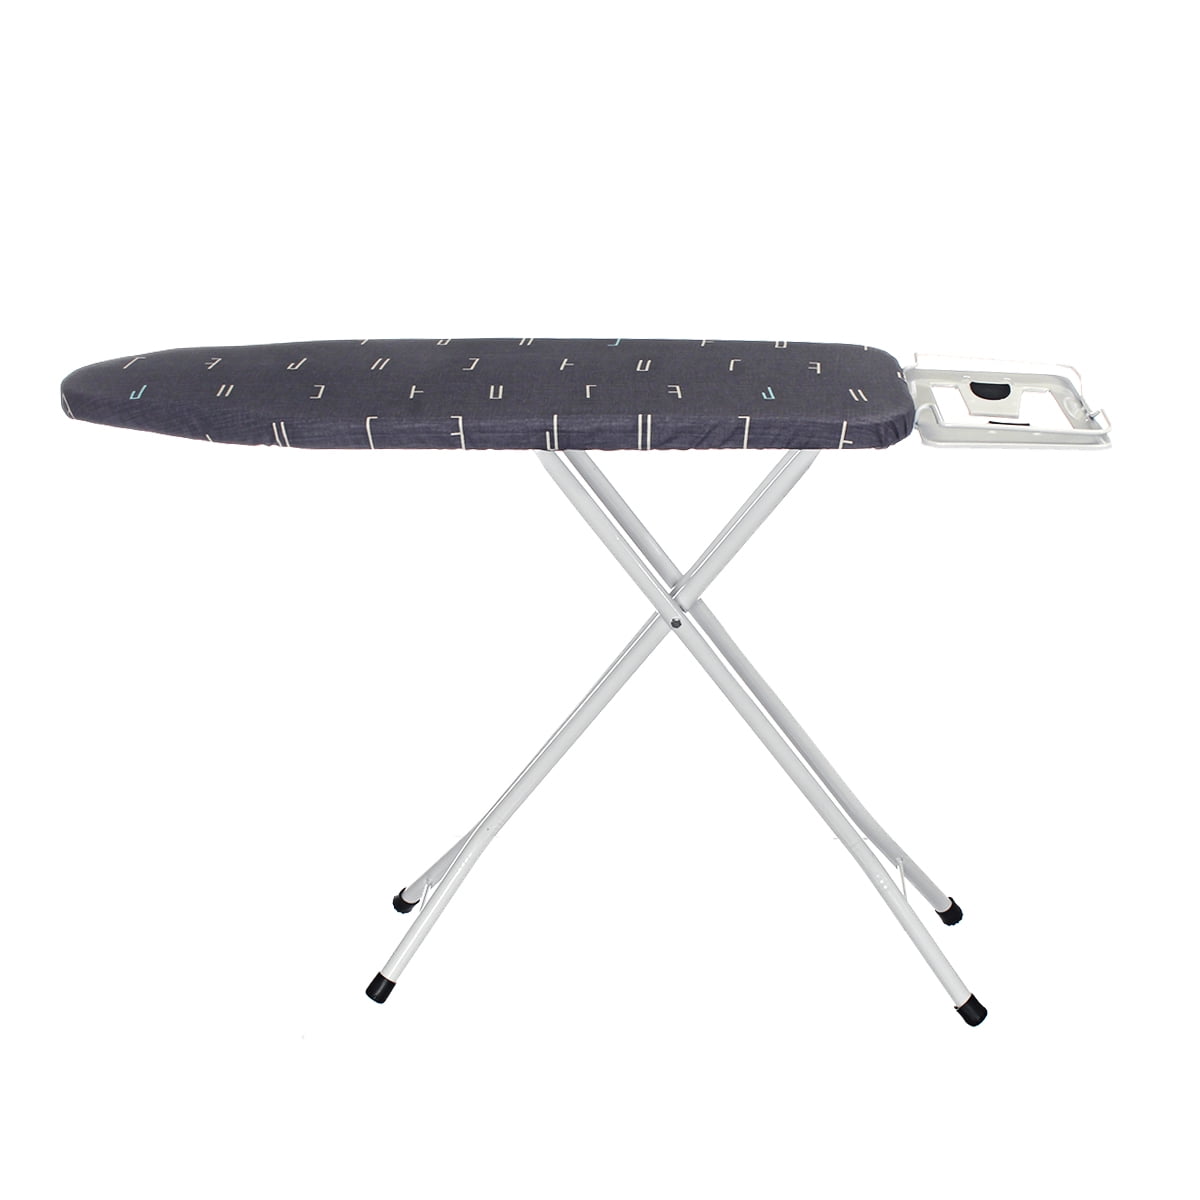 Details about   Ironing Board Table Wide Metal Iron Rack Foldable Non Slip Adjustable Height 